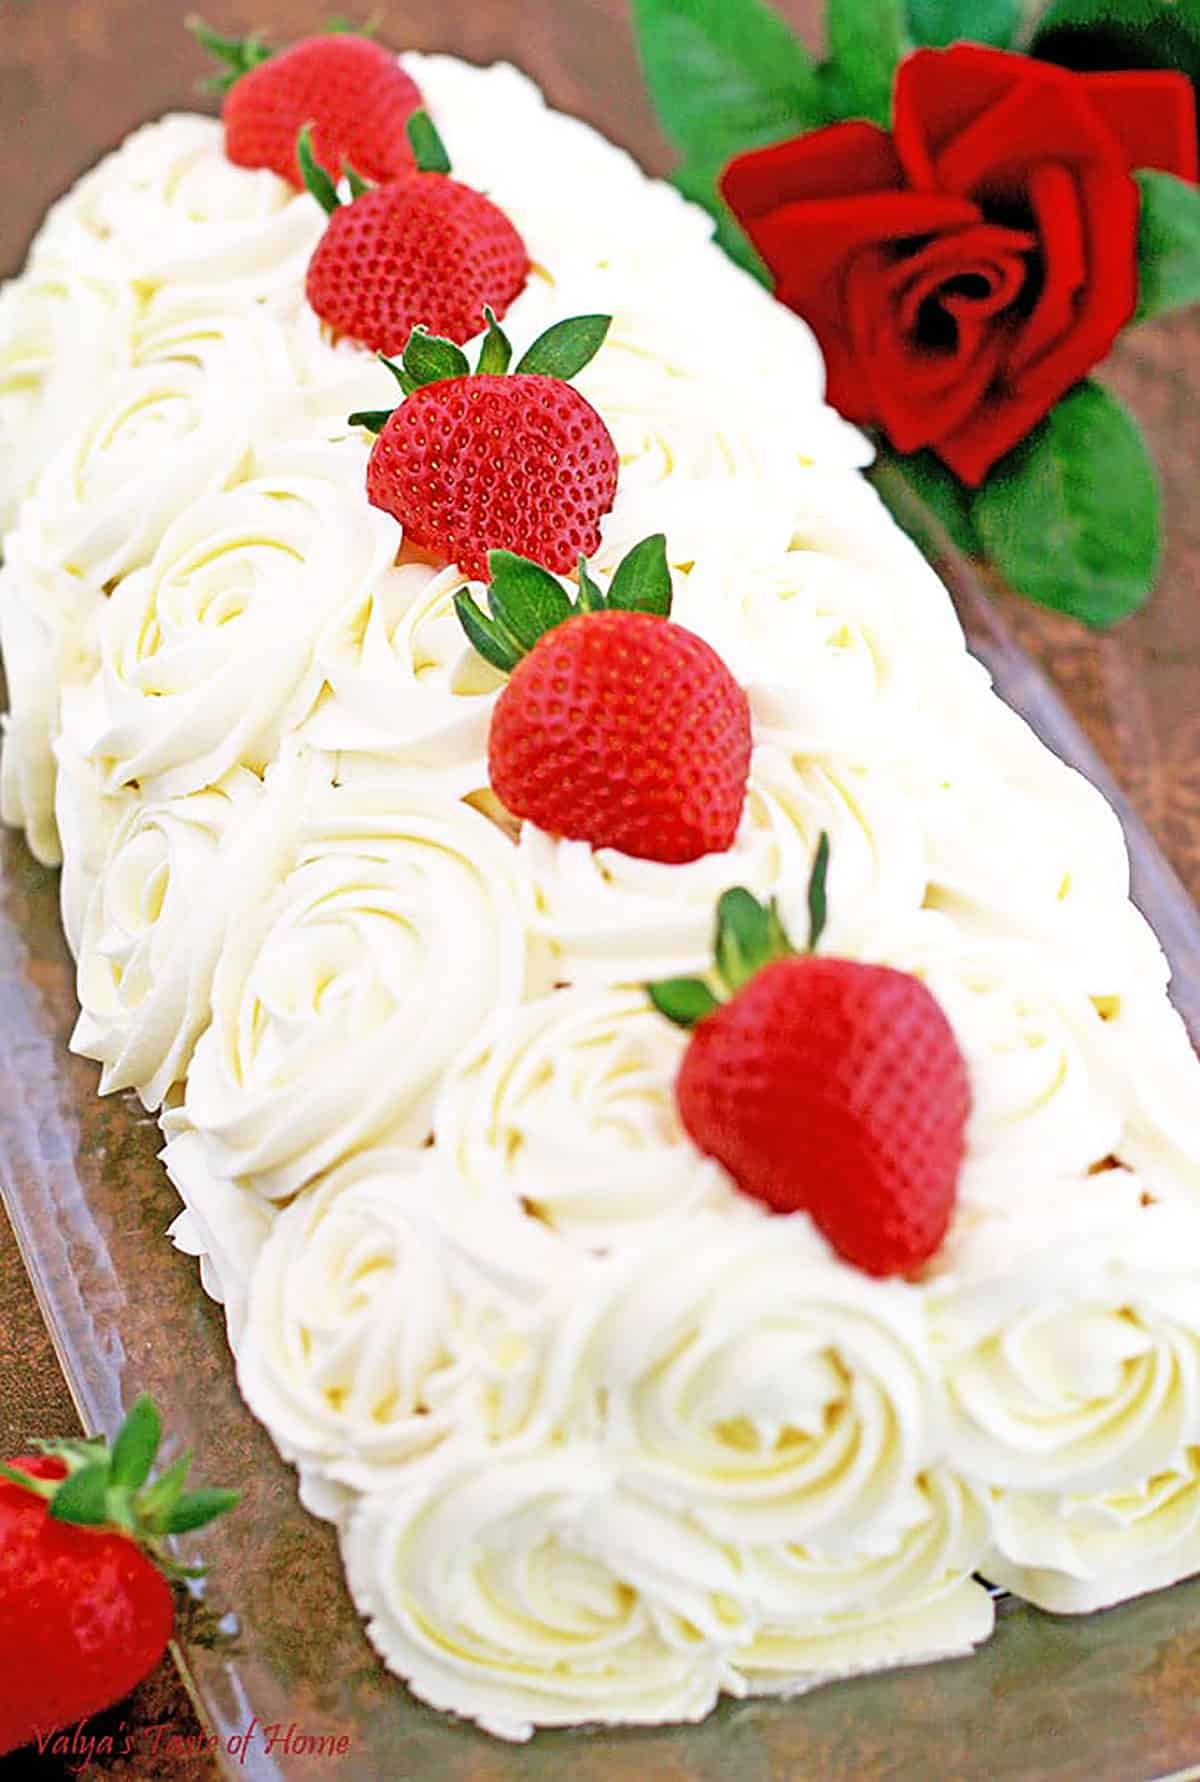 This Strawberry Roll Cake recipe is not only easy to make, but it also looks absolutely stunning. This Roll Cake is a spongy, fluffy cake filled with an incredibly delicious cream frosting and strawberries that will have you wanting more!